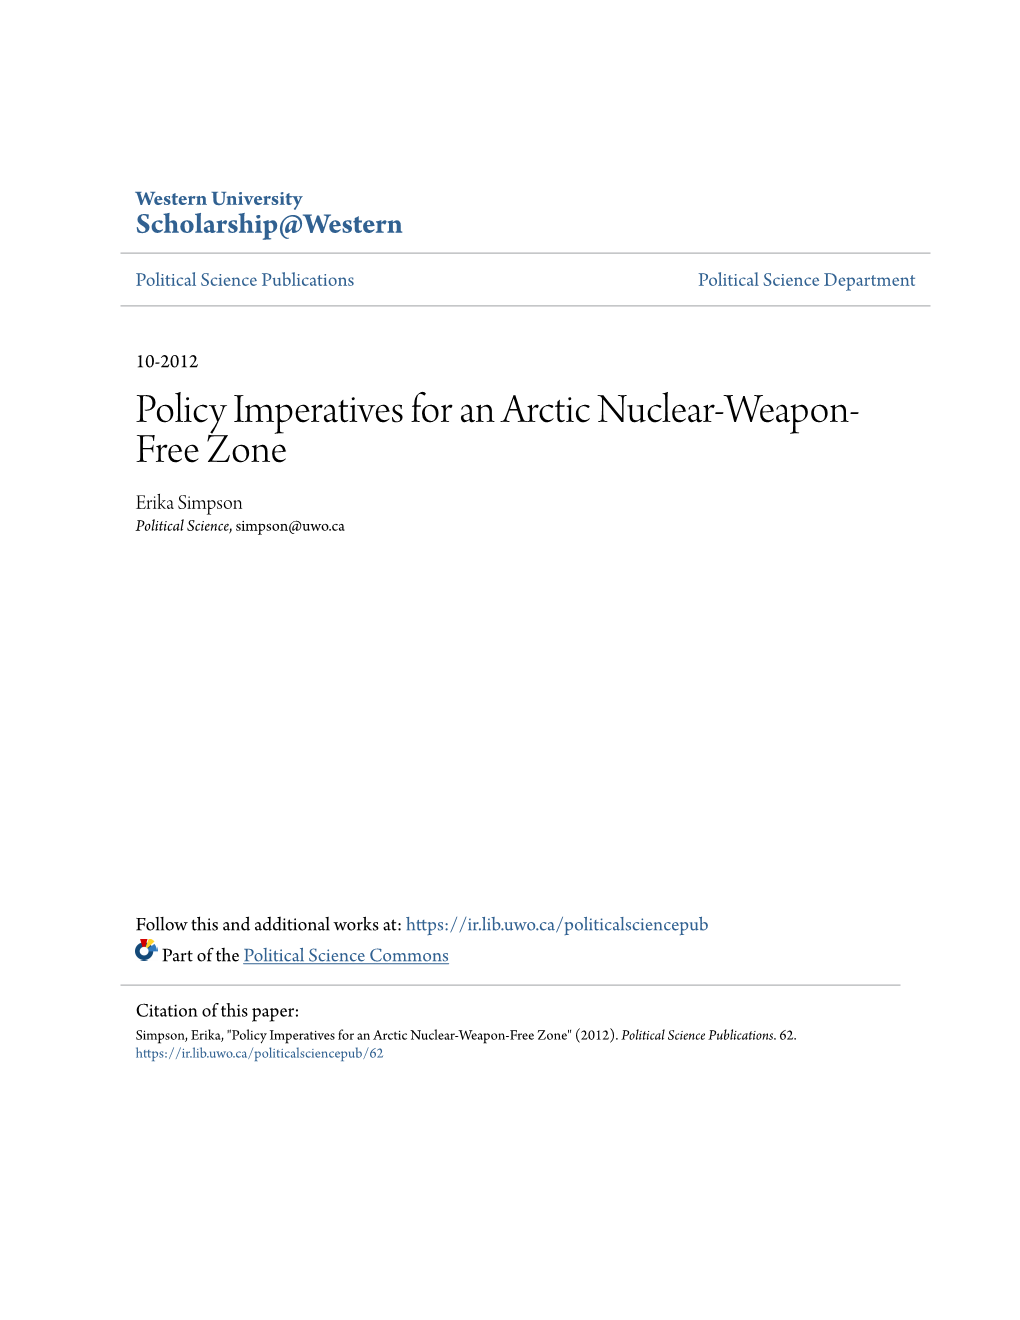 Policy Imperatives for an Arctic Nuclear-Weapon-Free Zone" (2012)